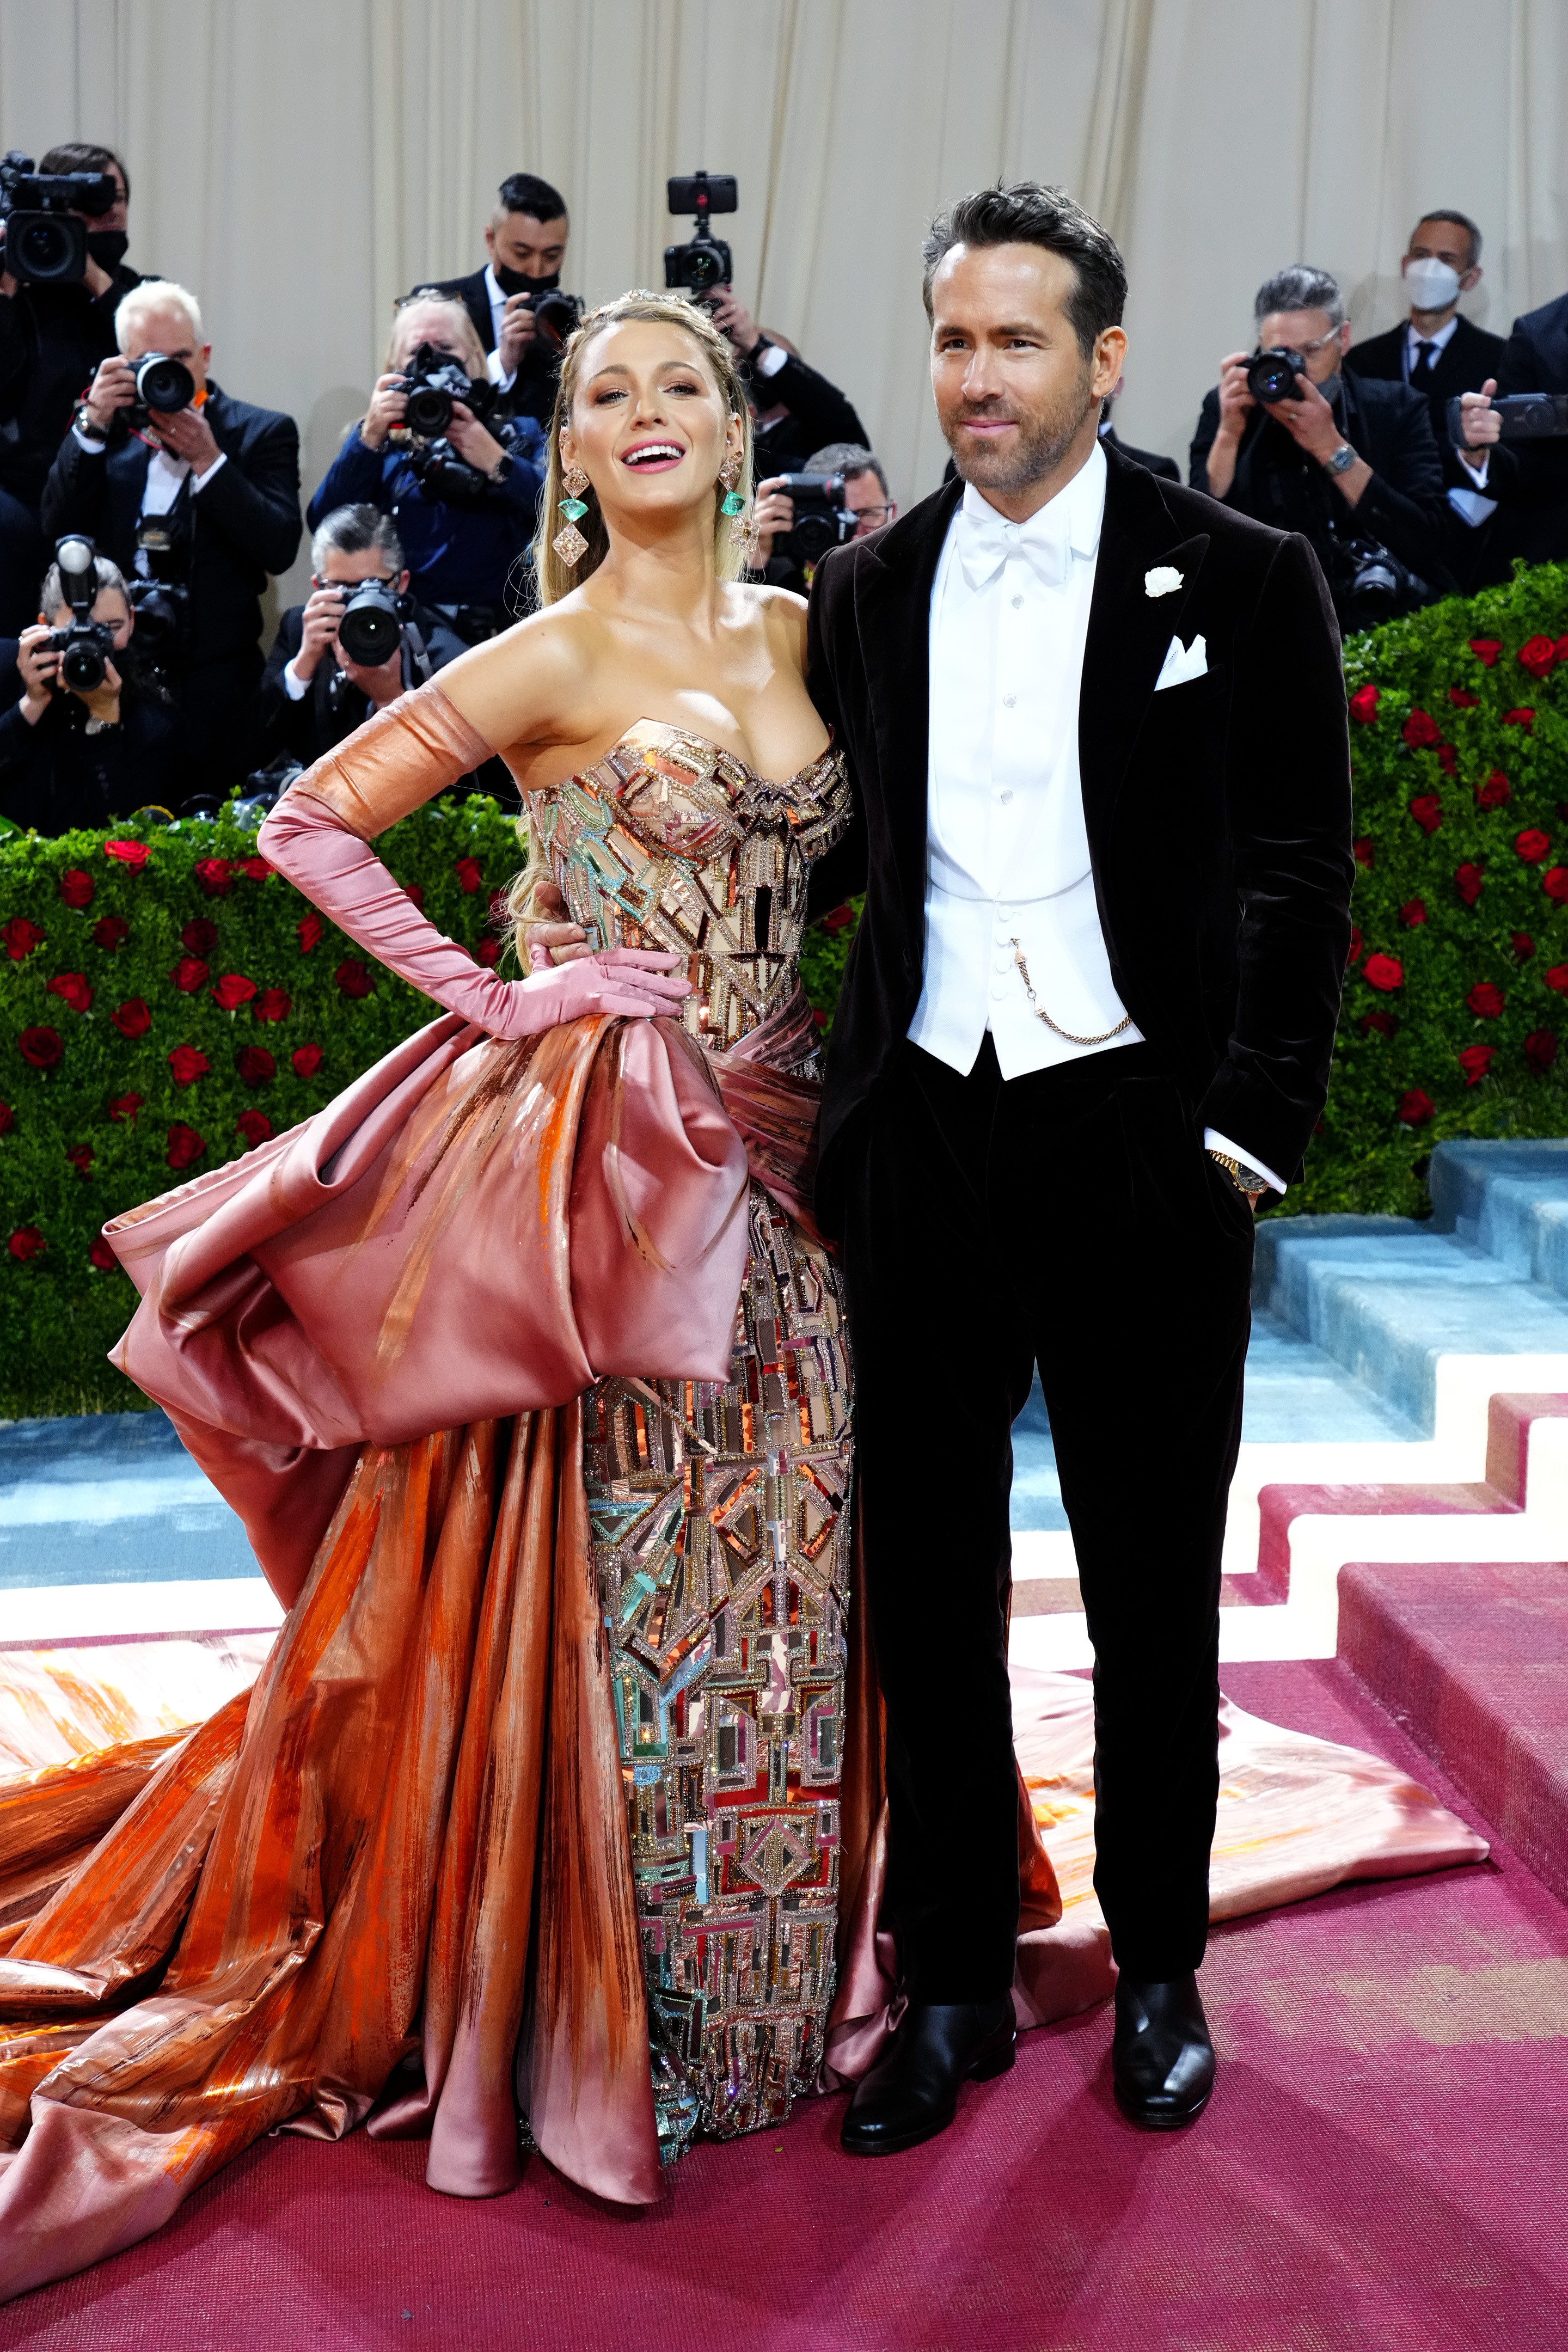 NEW YORK, NEW YORK - MAY 02: (L-R) Blake Lively and Ryan Reynolds attend The 2022 Met Gala Celebrating "In America: An Anthology of Fashion" at The Metropolitan Museum of Art on May 02, 2022 in New York City. (Photo by Jeff Kravitz/FilmMagic) (Foto: FilmMagic)